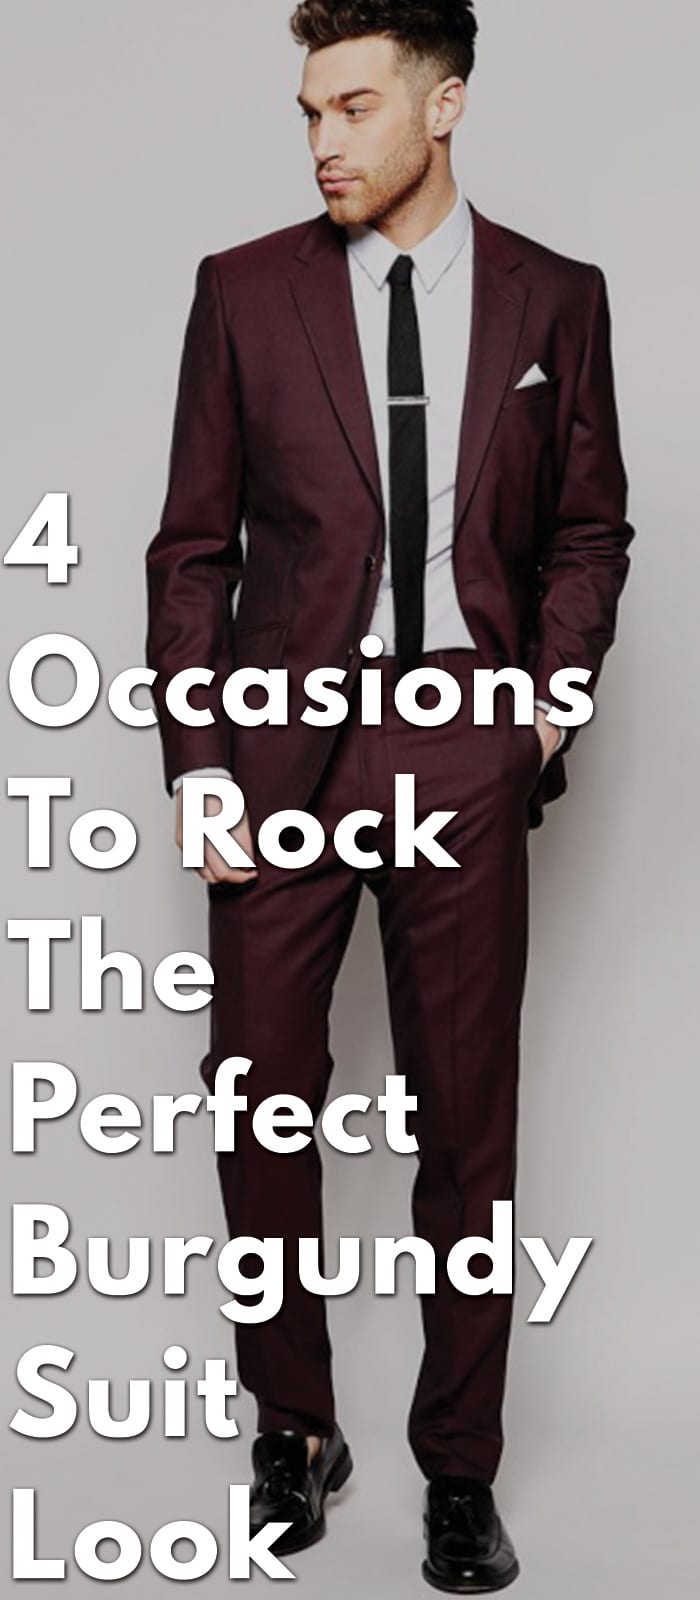 4-Occasions-To-Rock-The-Perfect-Burgundy-Suit-Look